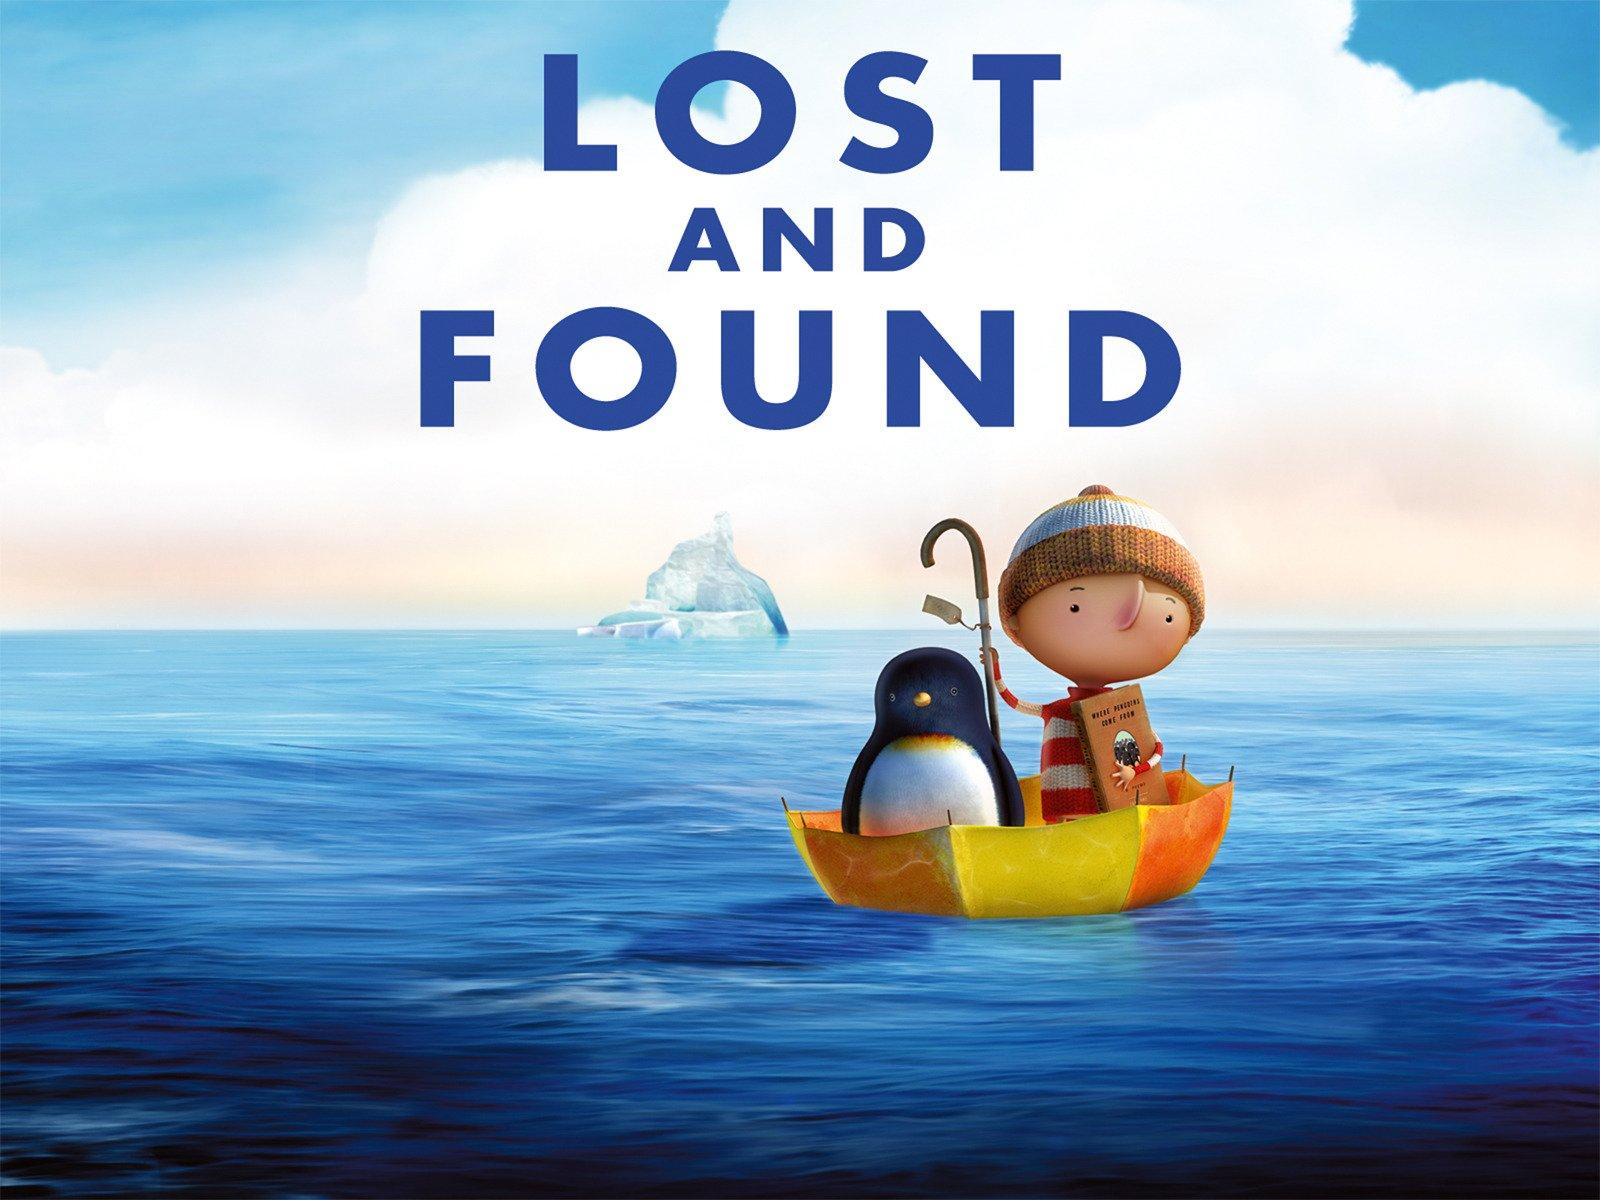 Amazon.co.uk: Watch Lost and Found Season 1